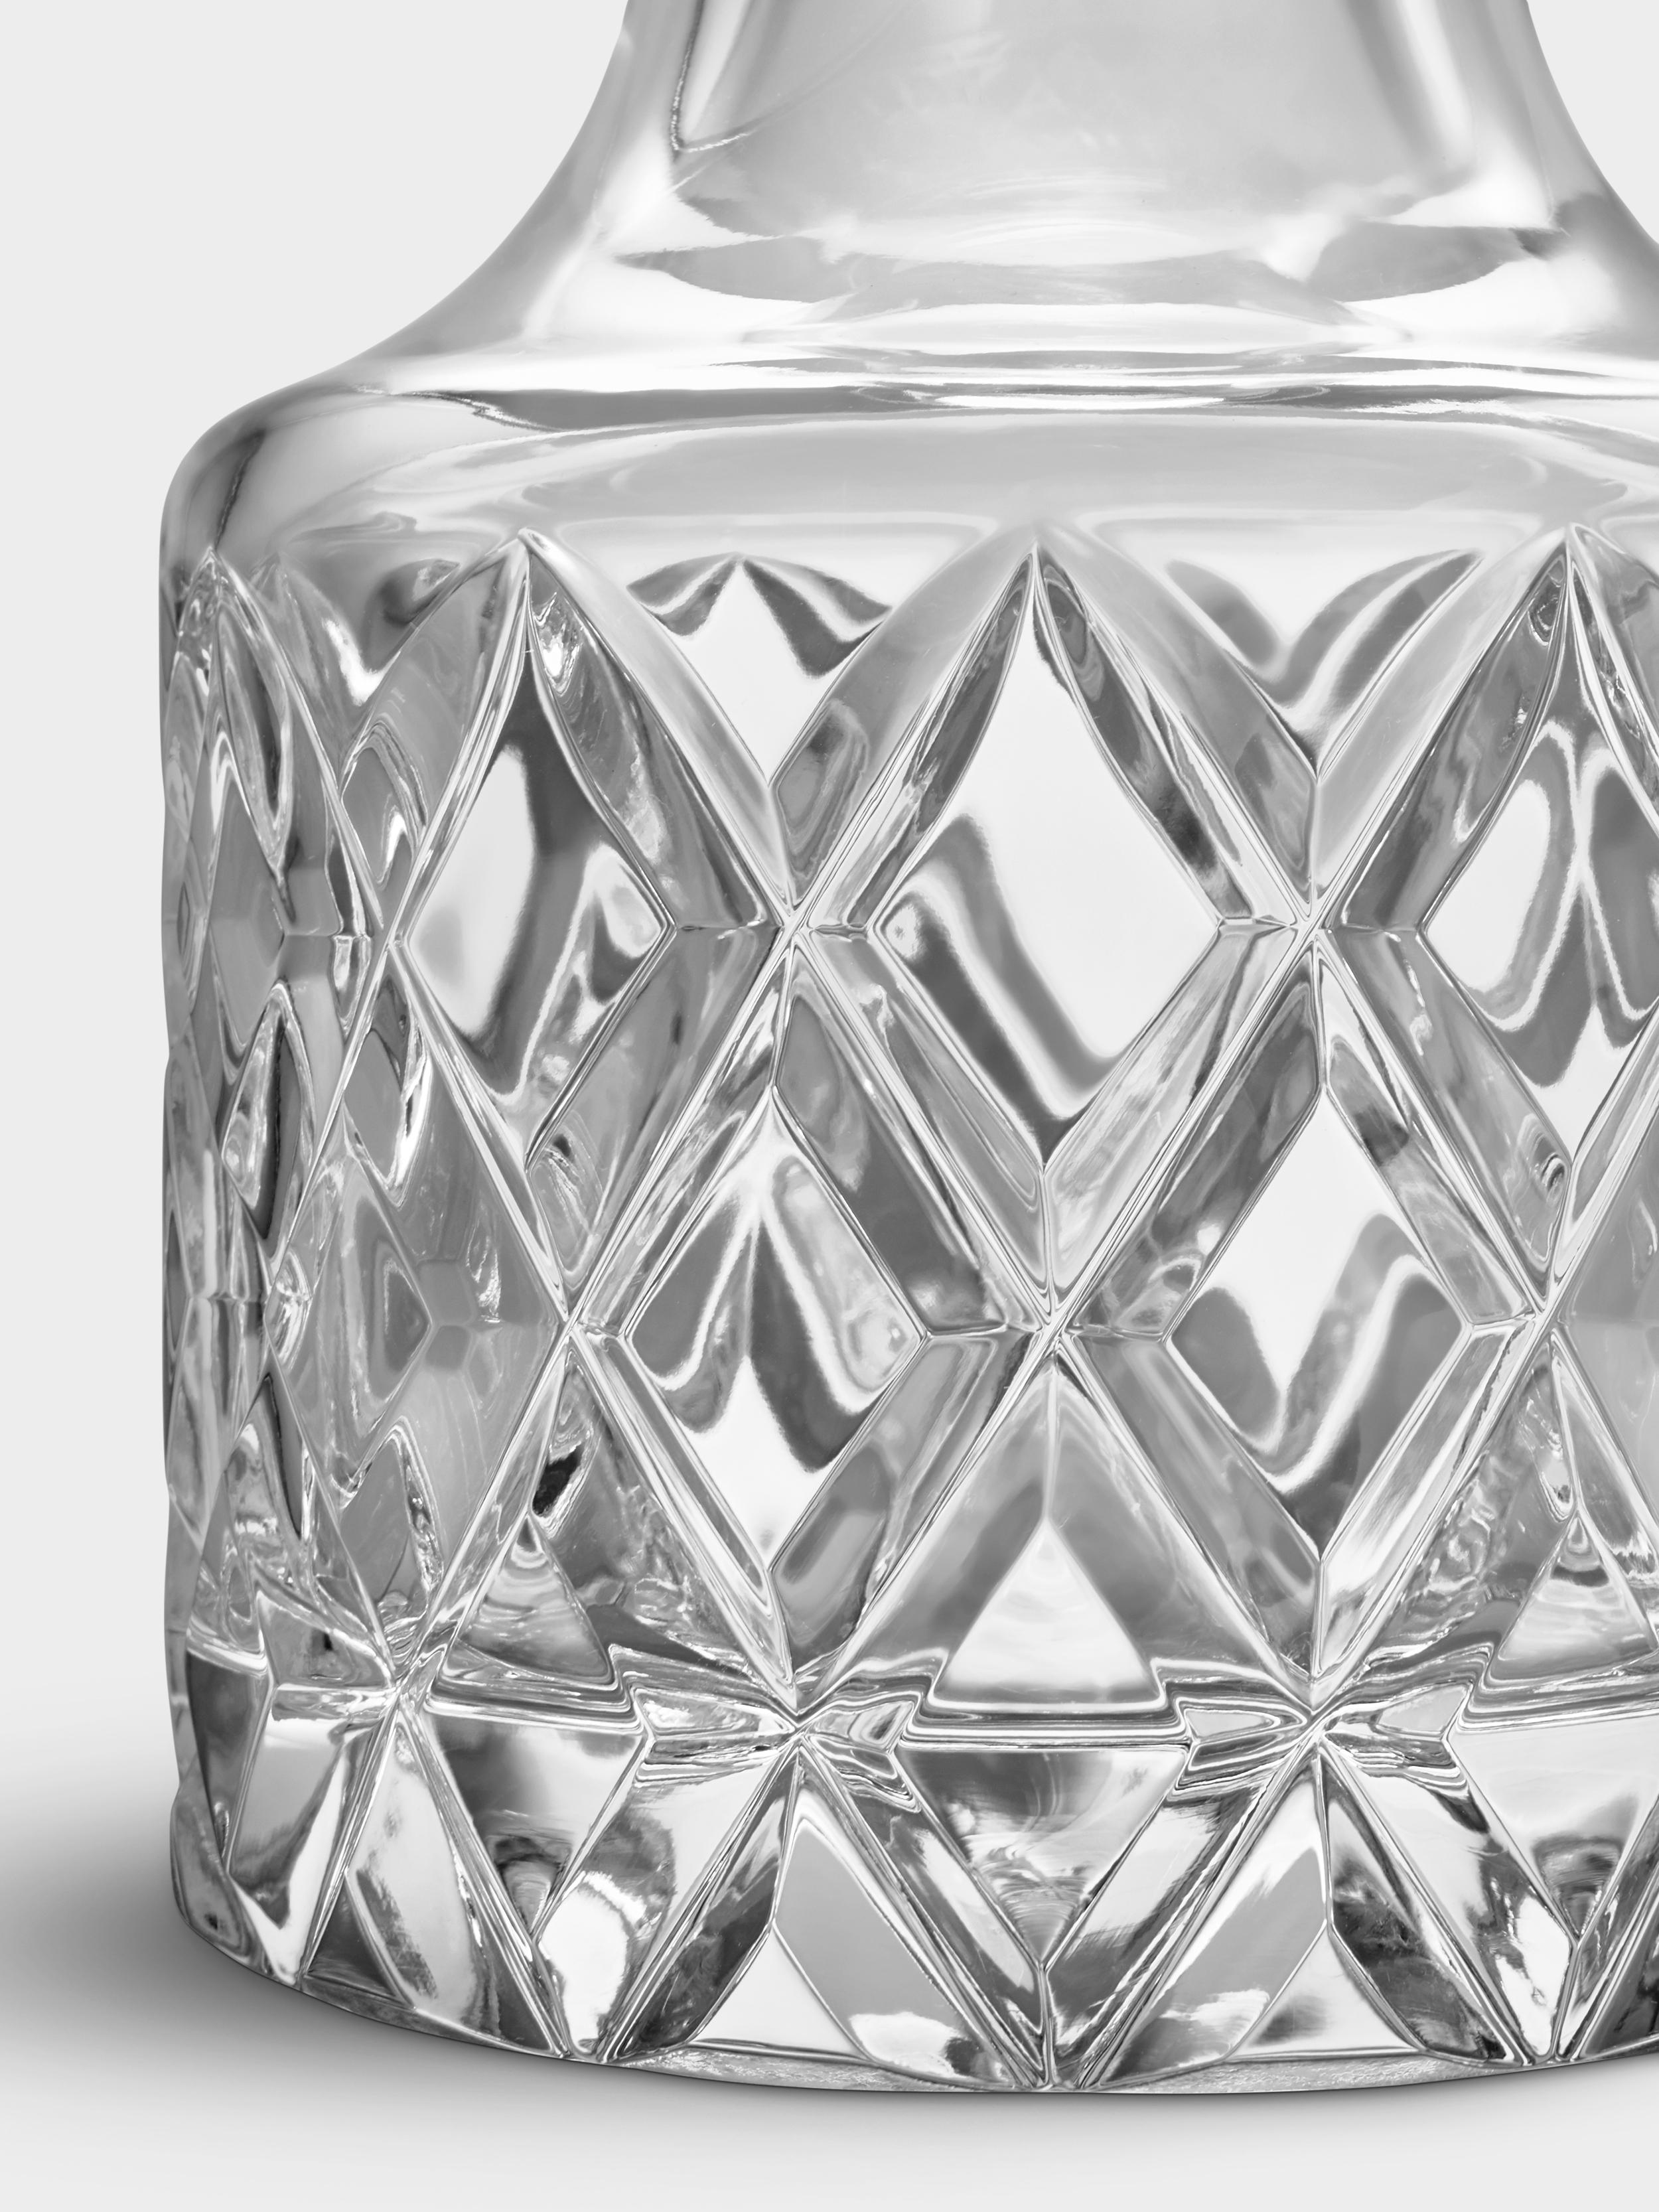 The decanter in the Sofiero collection from Orrefors, designed by Gunnar Cyrén in 1960, is a timeless Scandinavian classic. It has a deep-cut motif, which beautifully refracts light in the thick crystal. Sofiero Decanter, which holds 25 oz, is